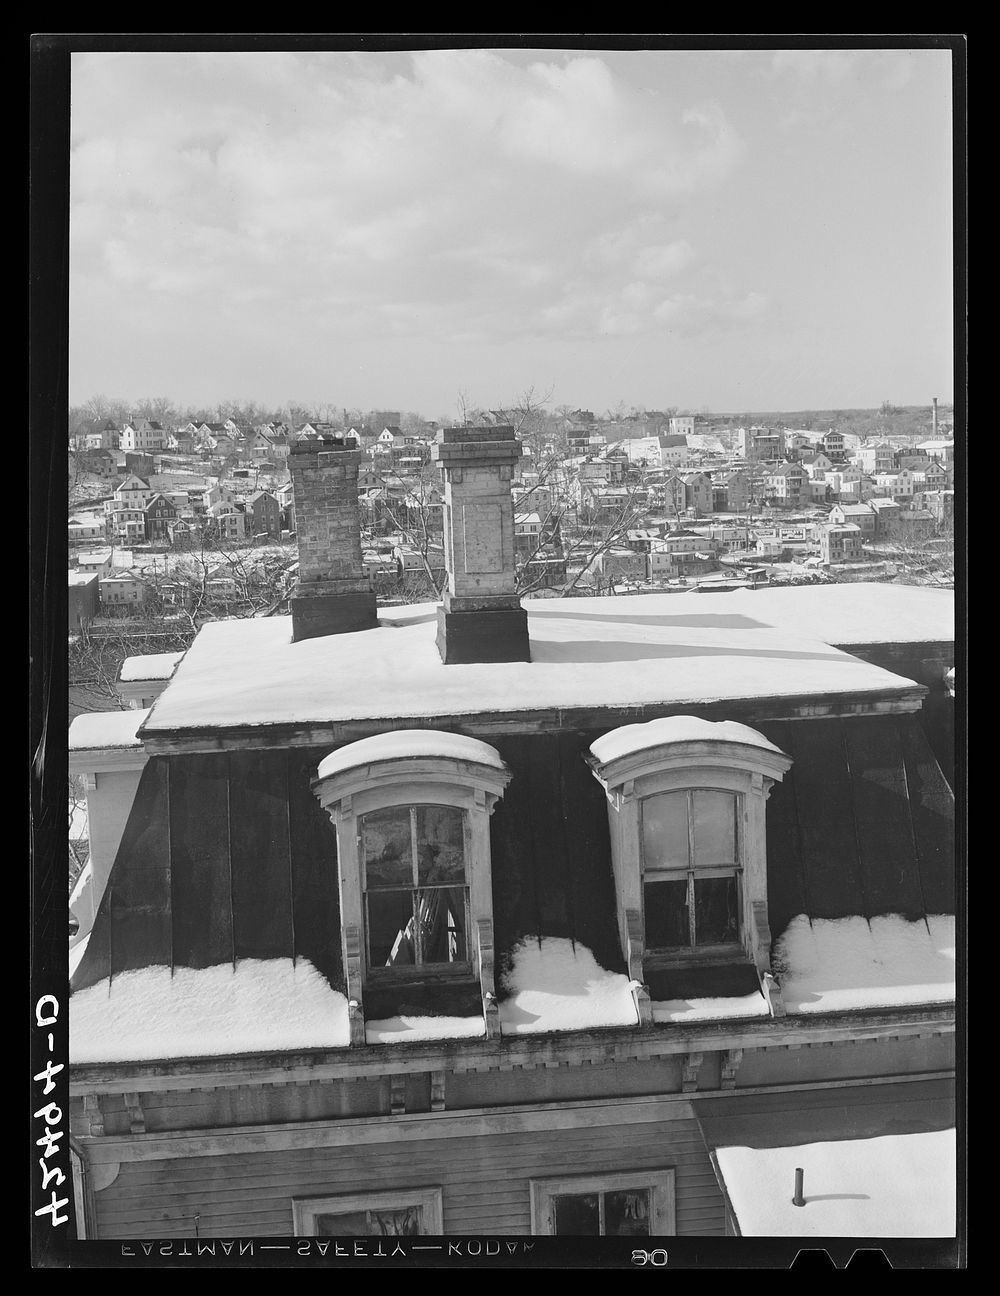 After a snowstorm. Norwich, Connecticut. Sourced from the Library of Congress.